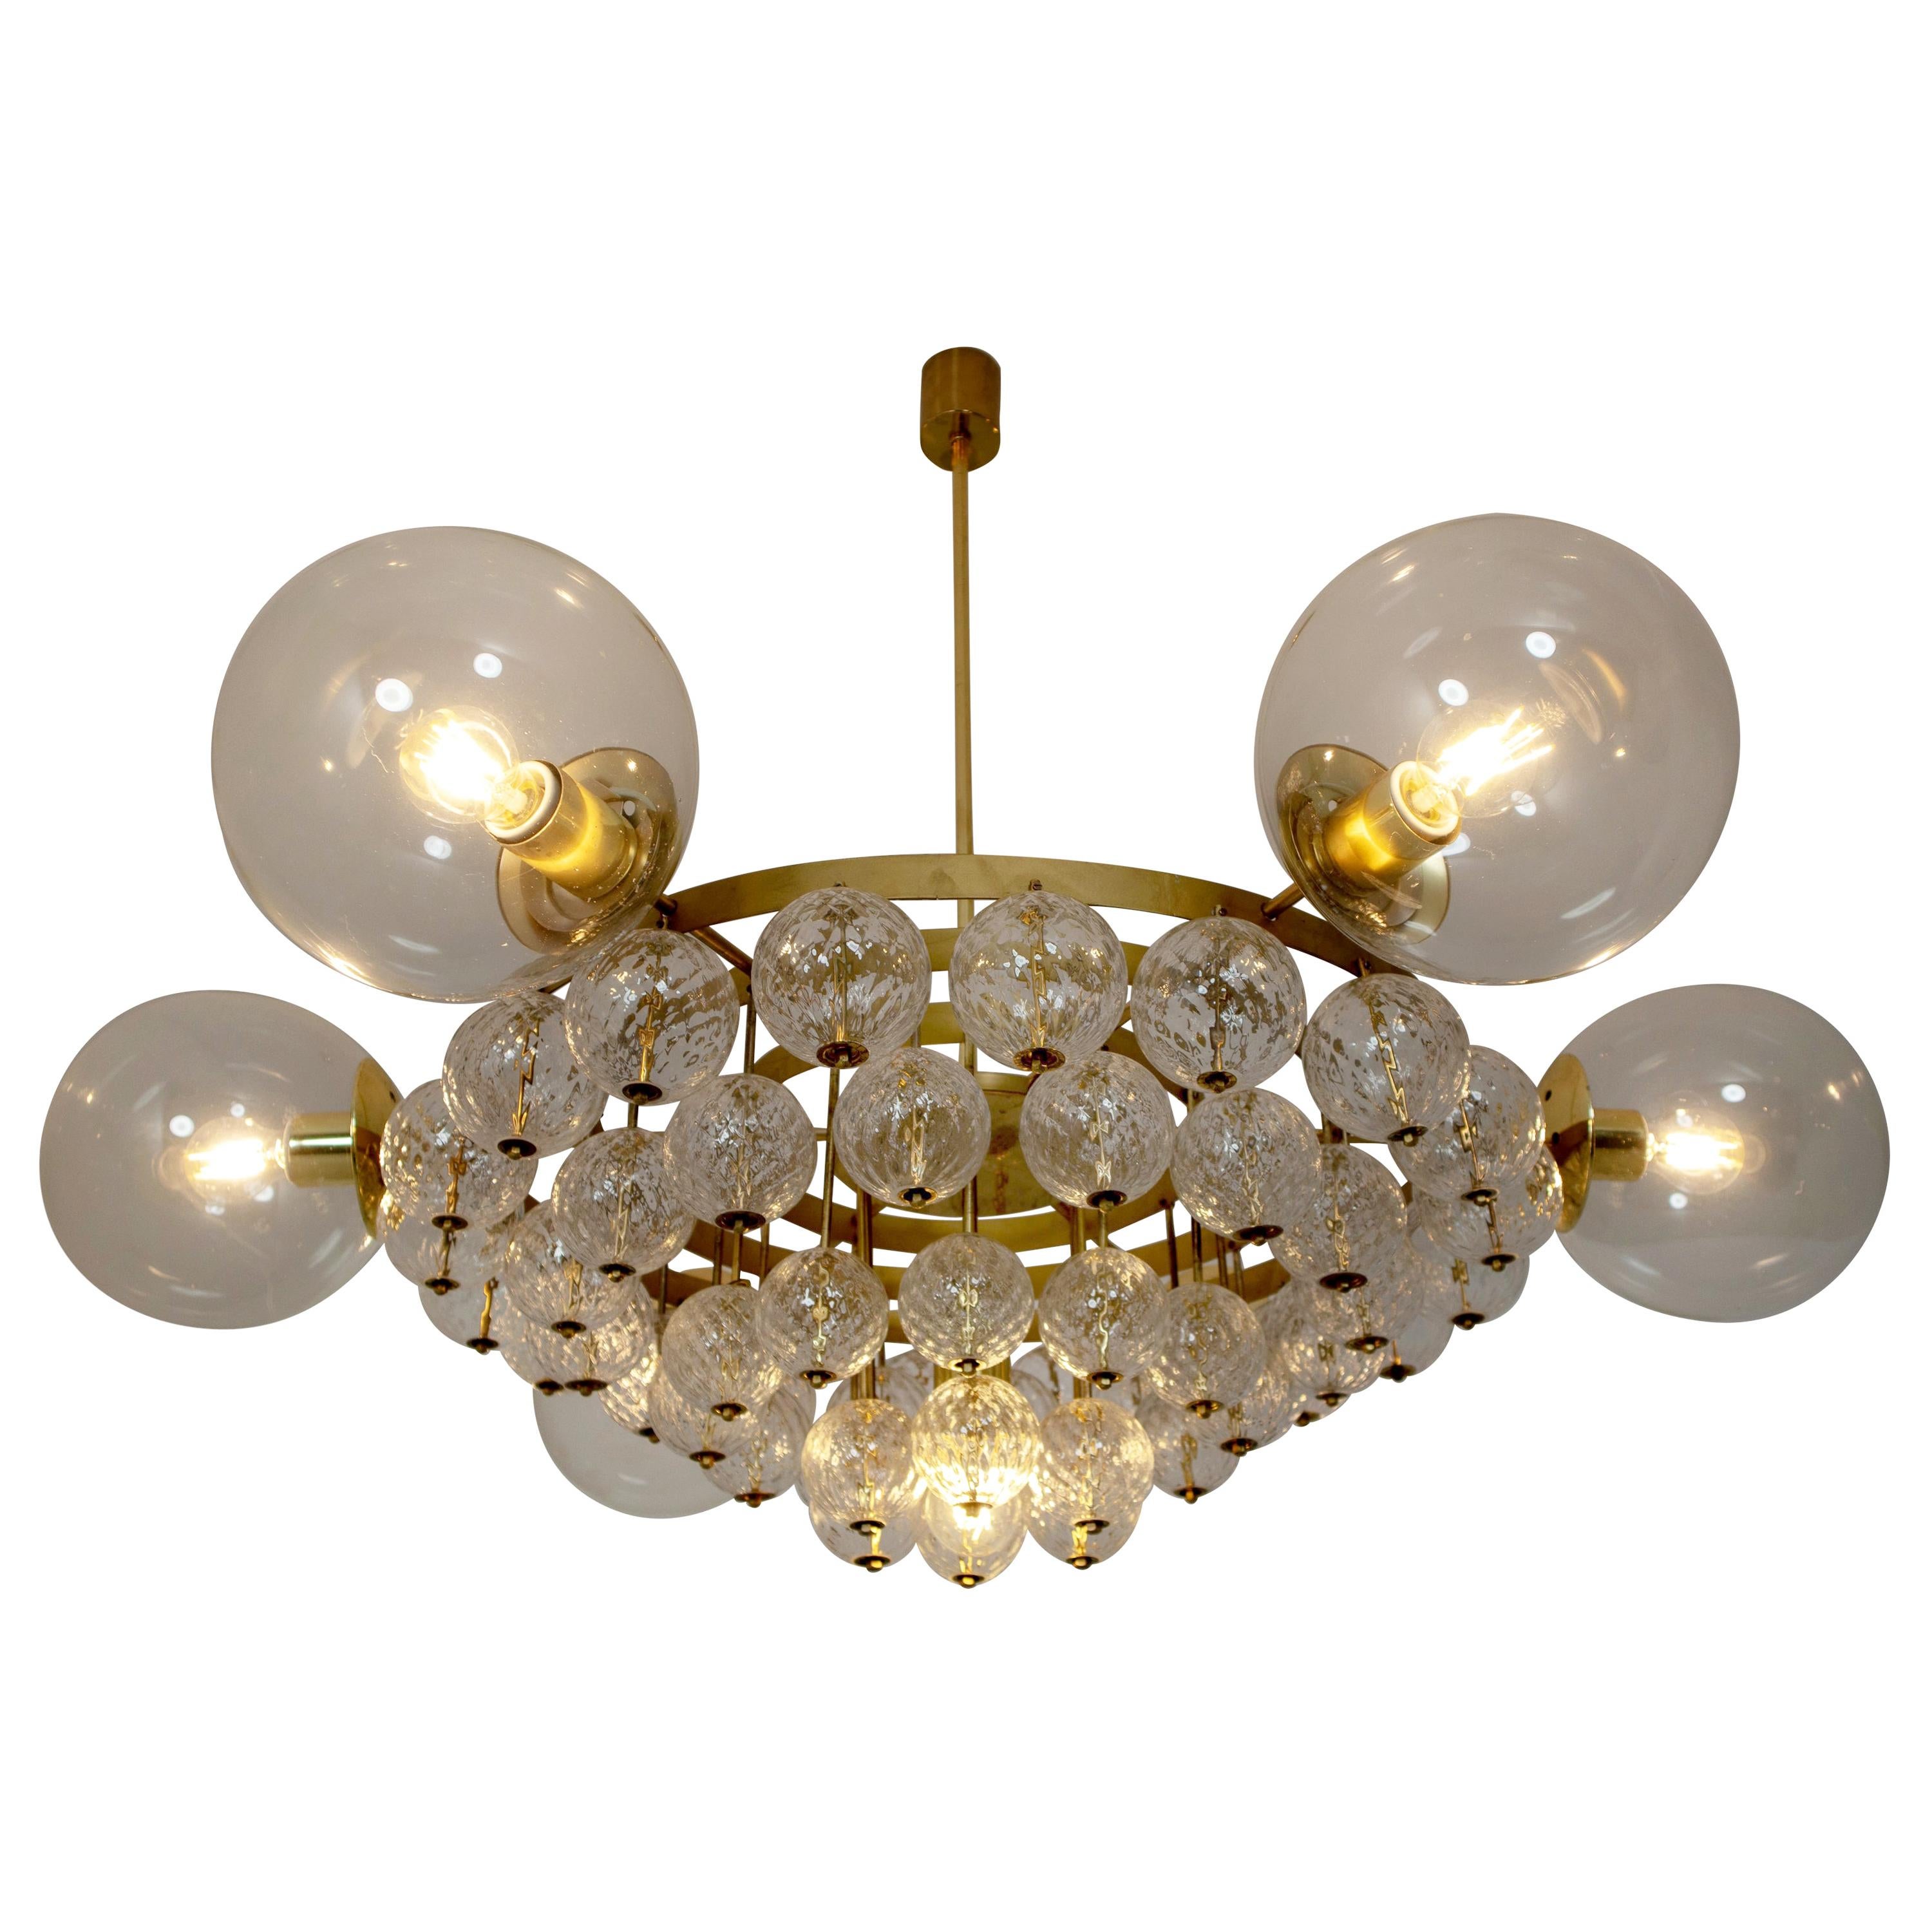 Grand Chandelier with Brass Fixture and Glass Globes For Sale